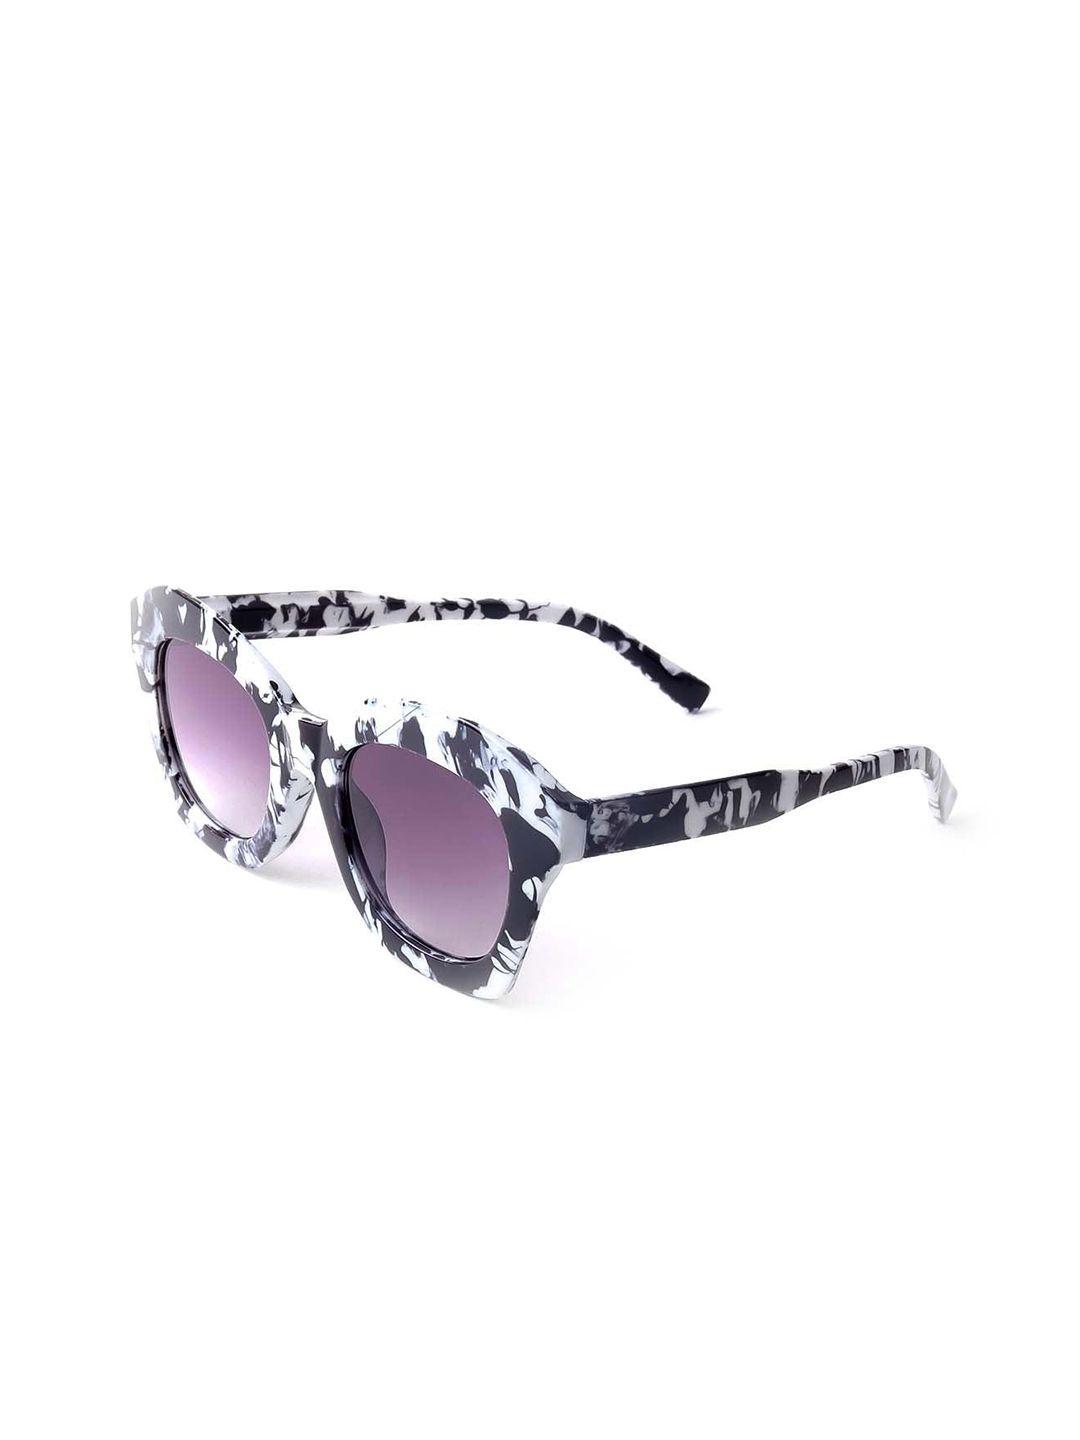 odette women cateye sunglasses with uv protected lens